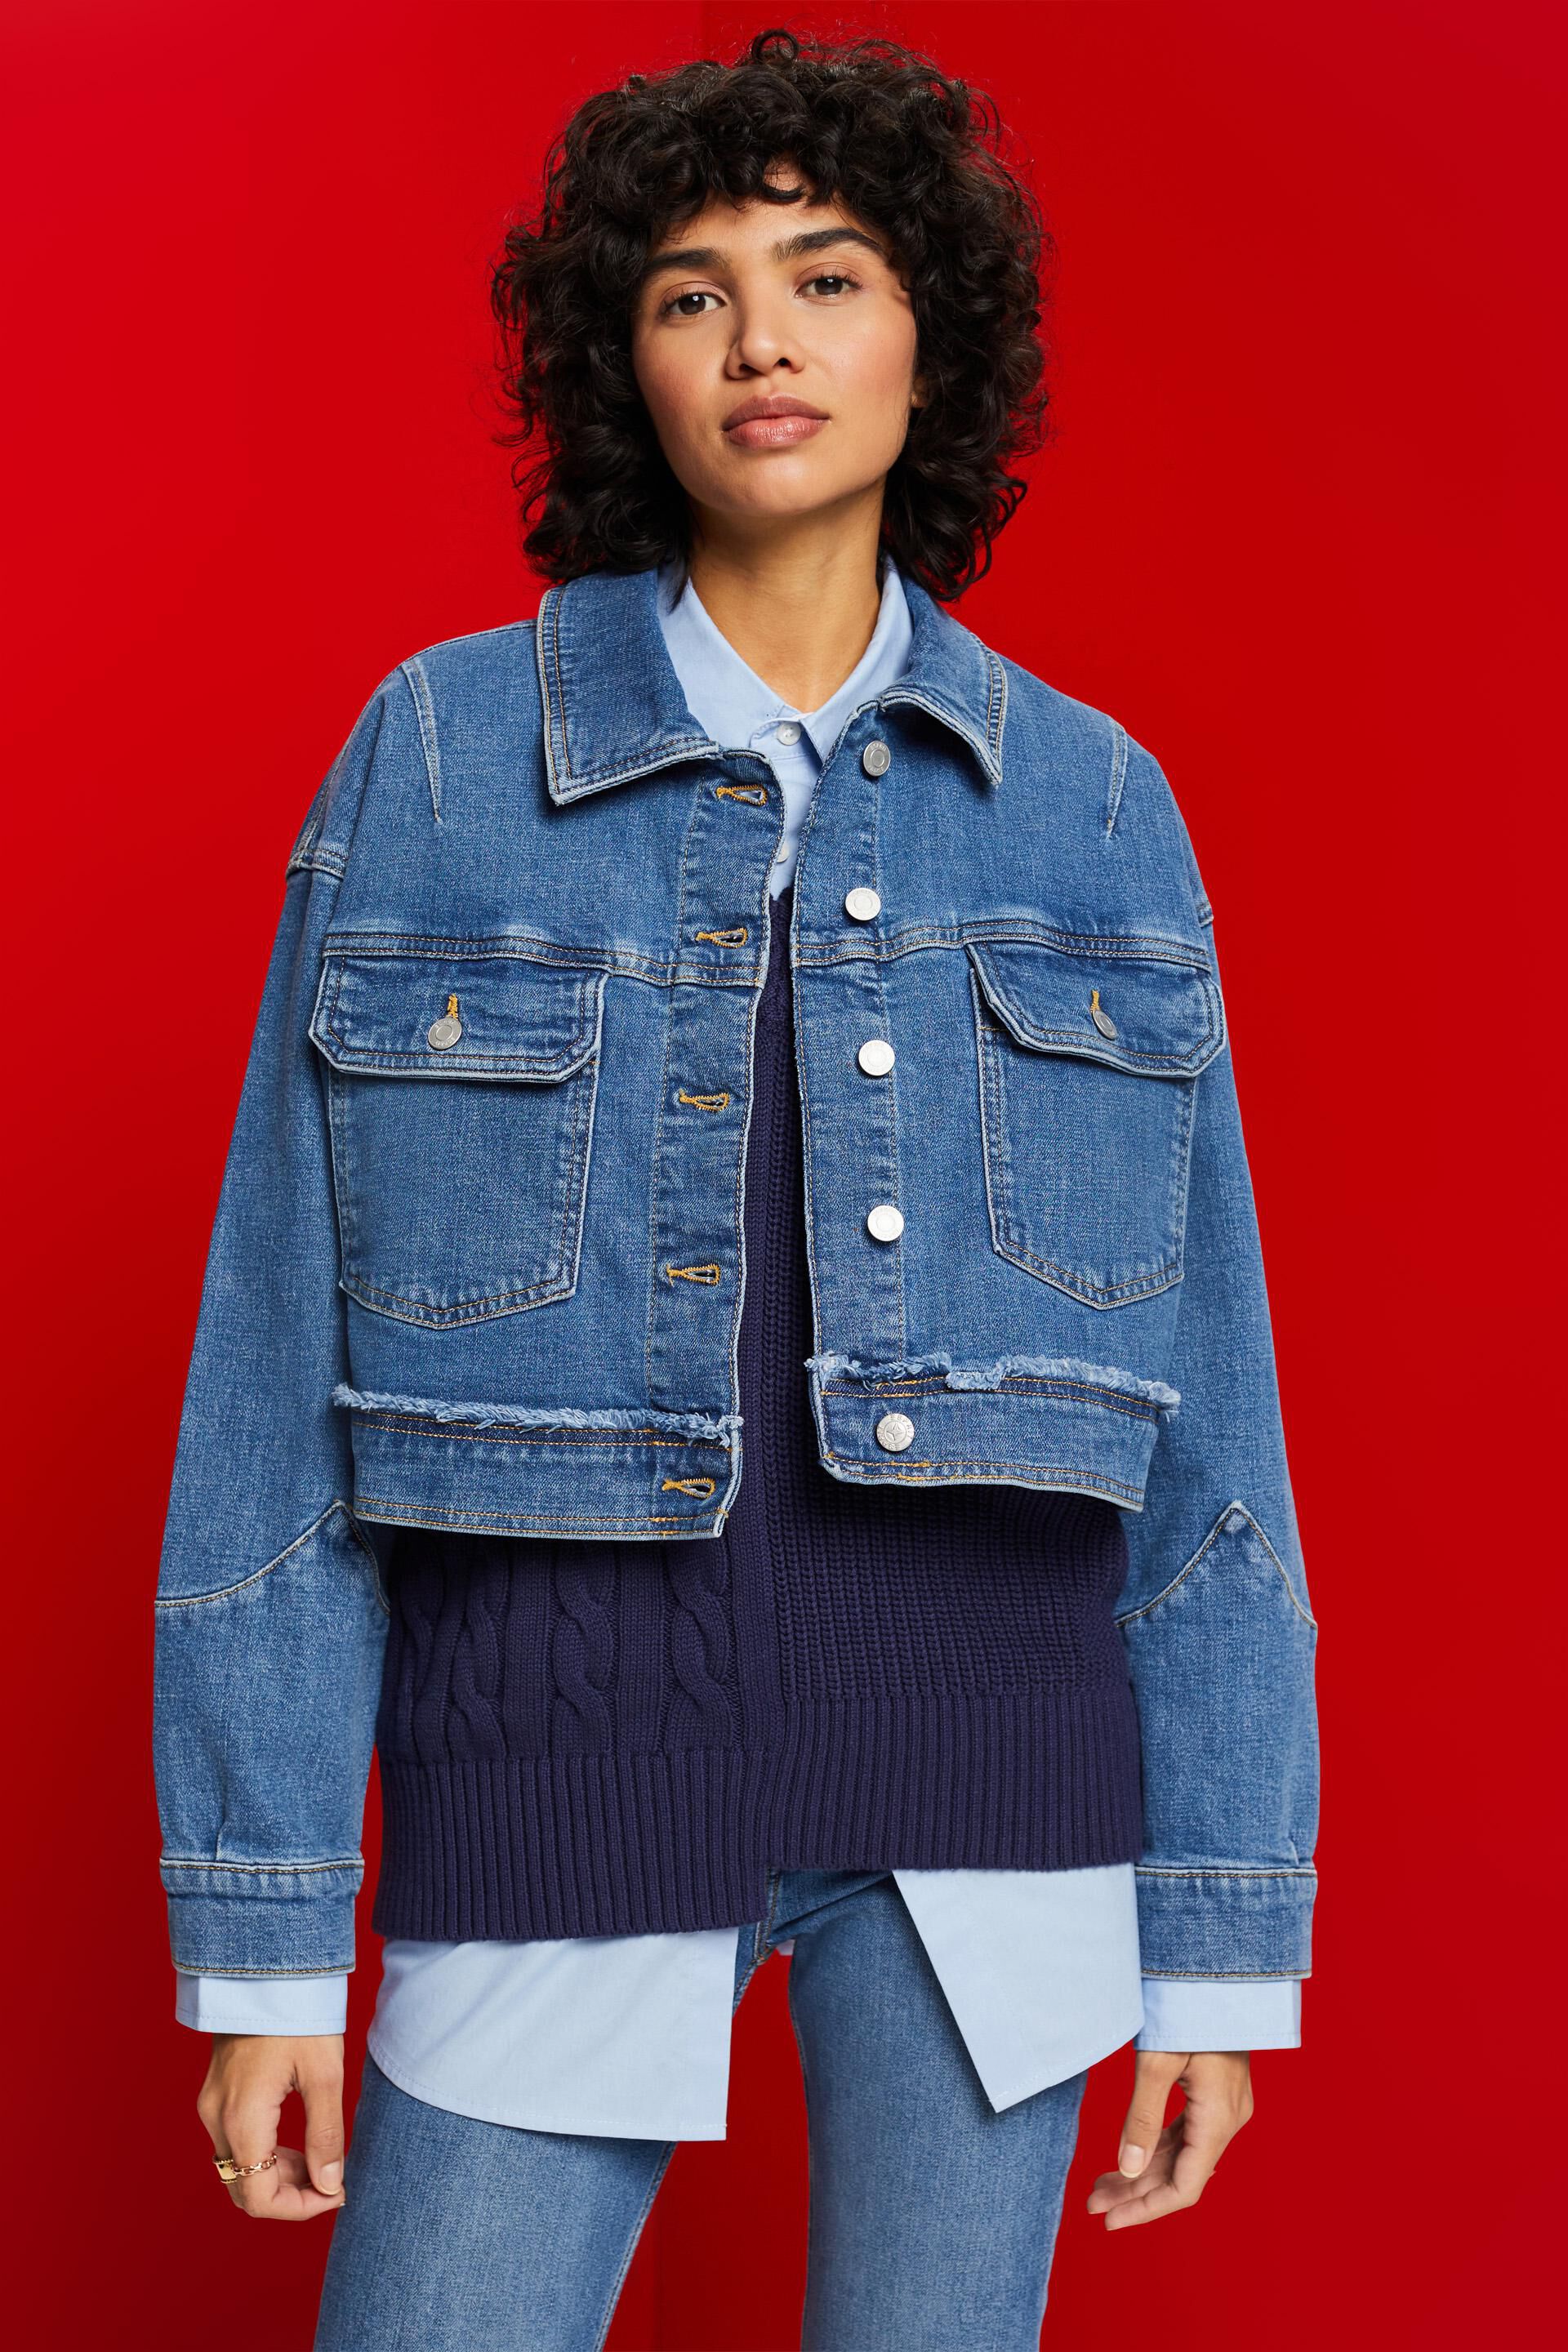 How to wear a denim jacket, according to style experts - TODAY